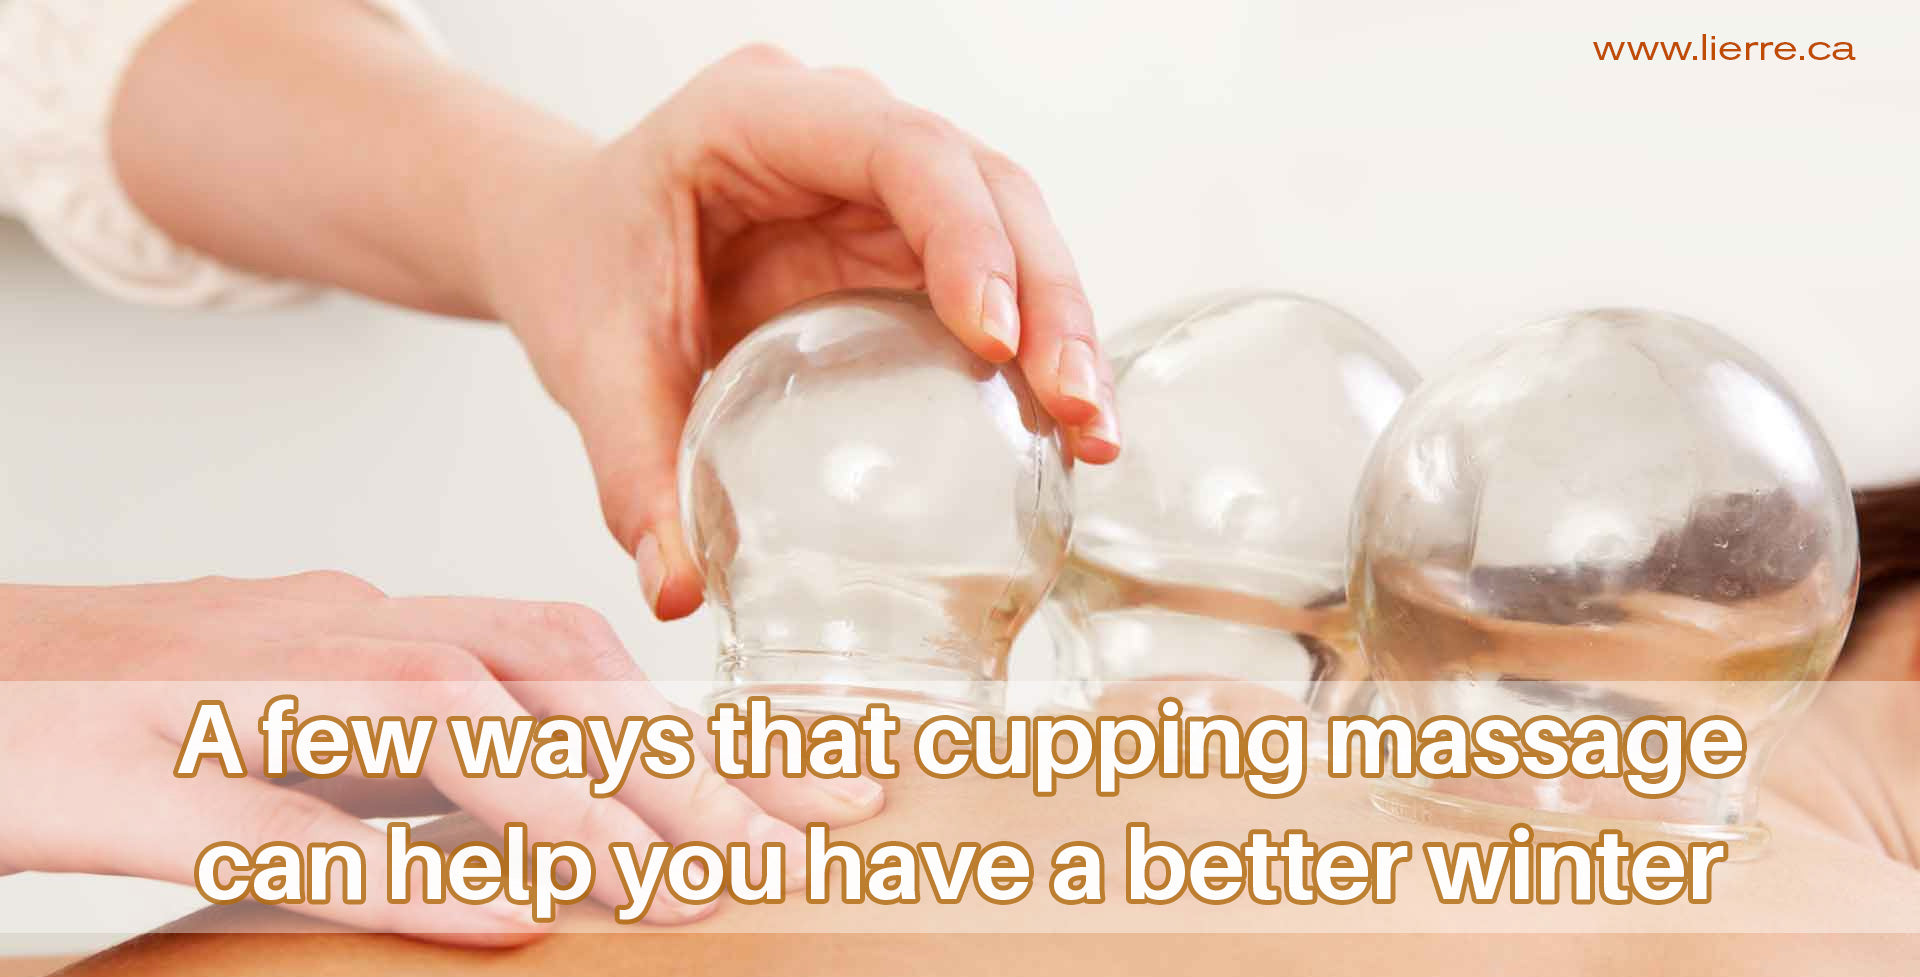 shop cupping massage sets at lierre for winter